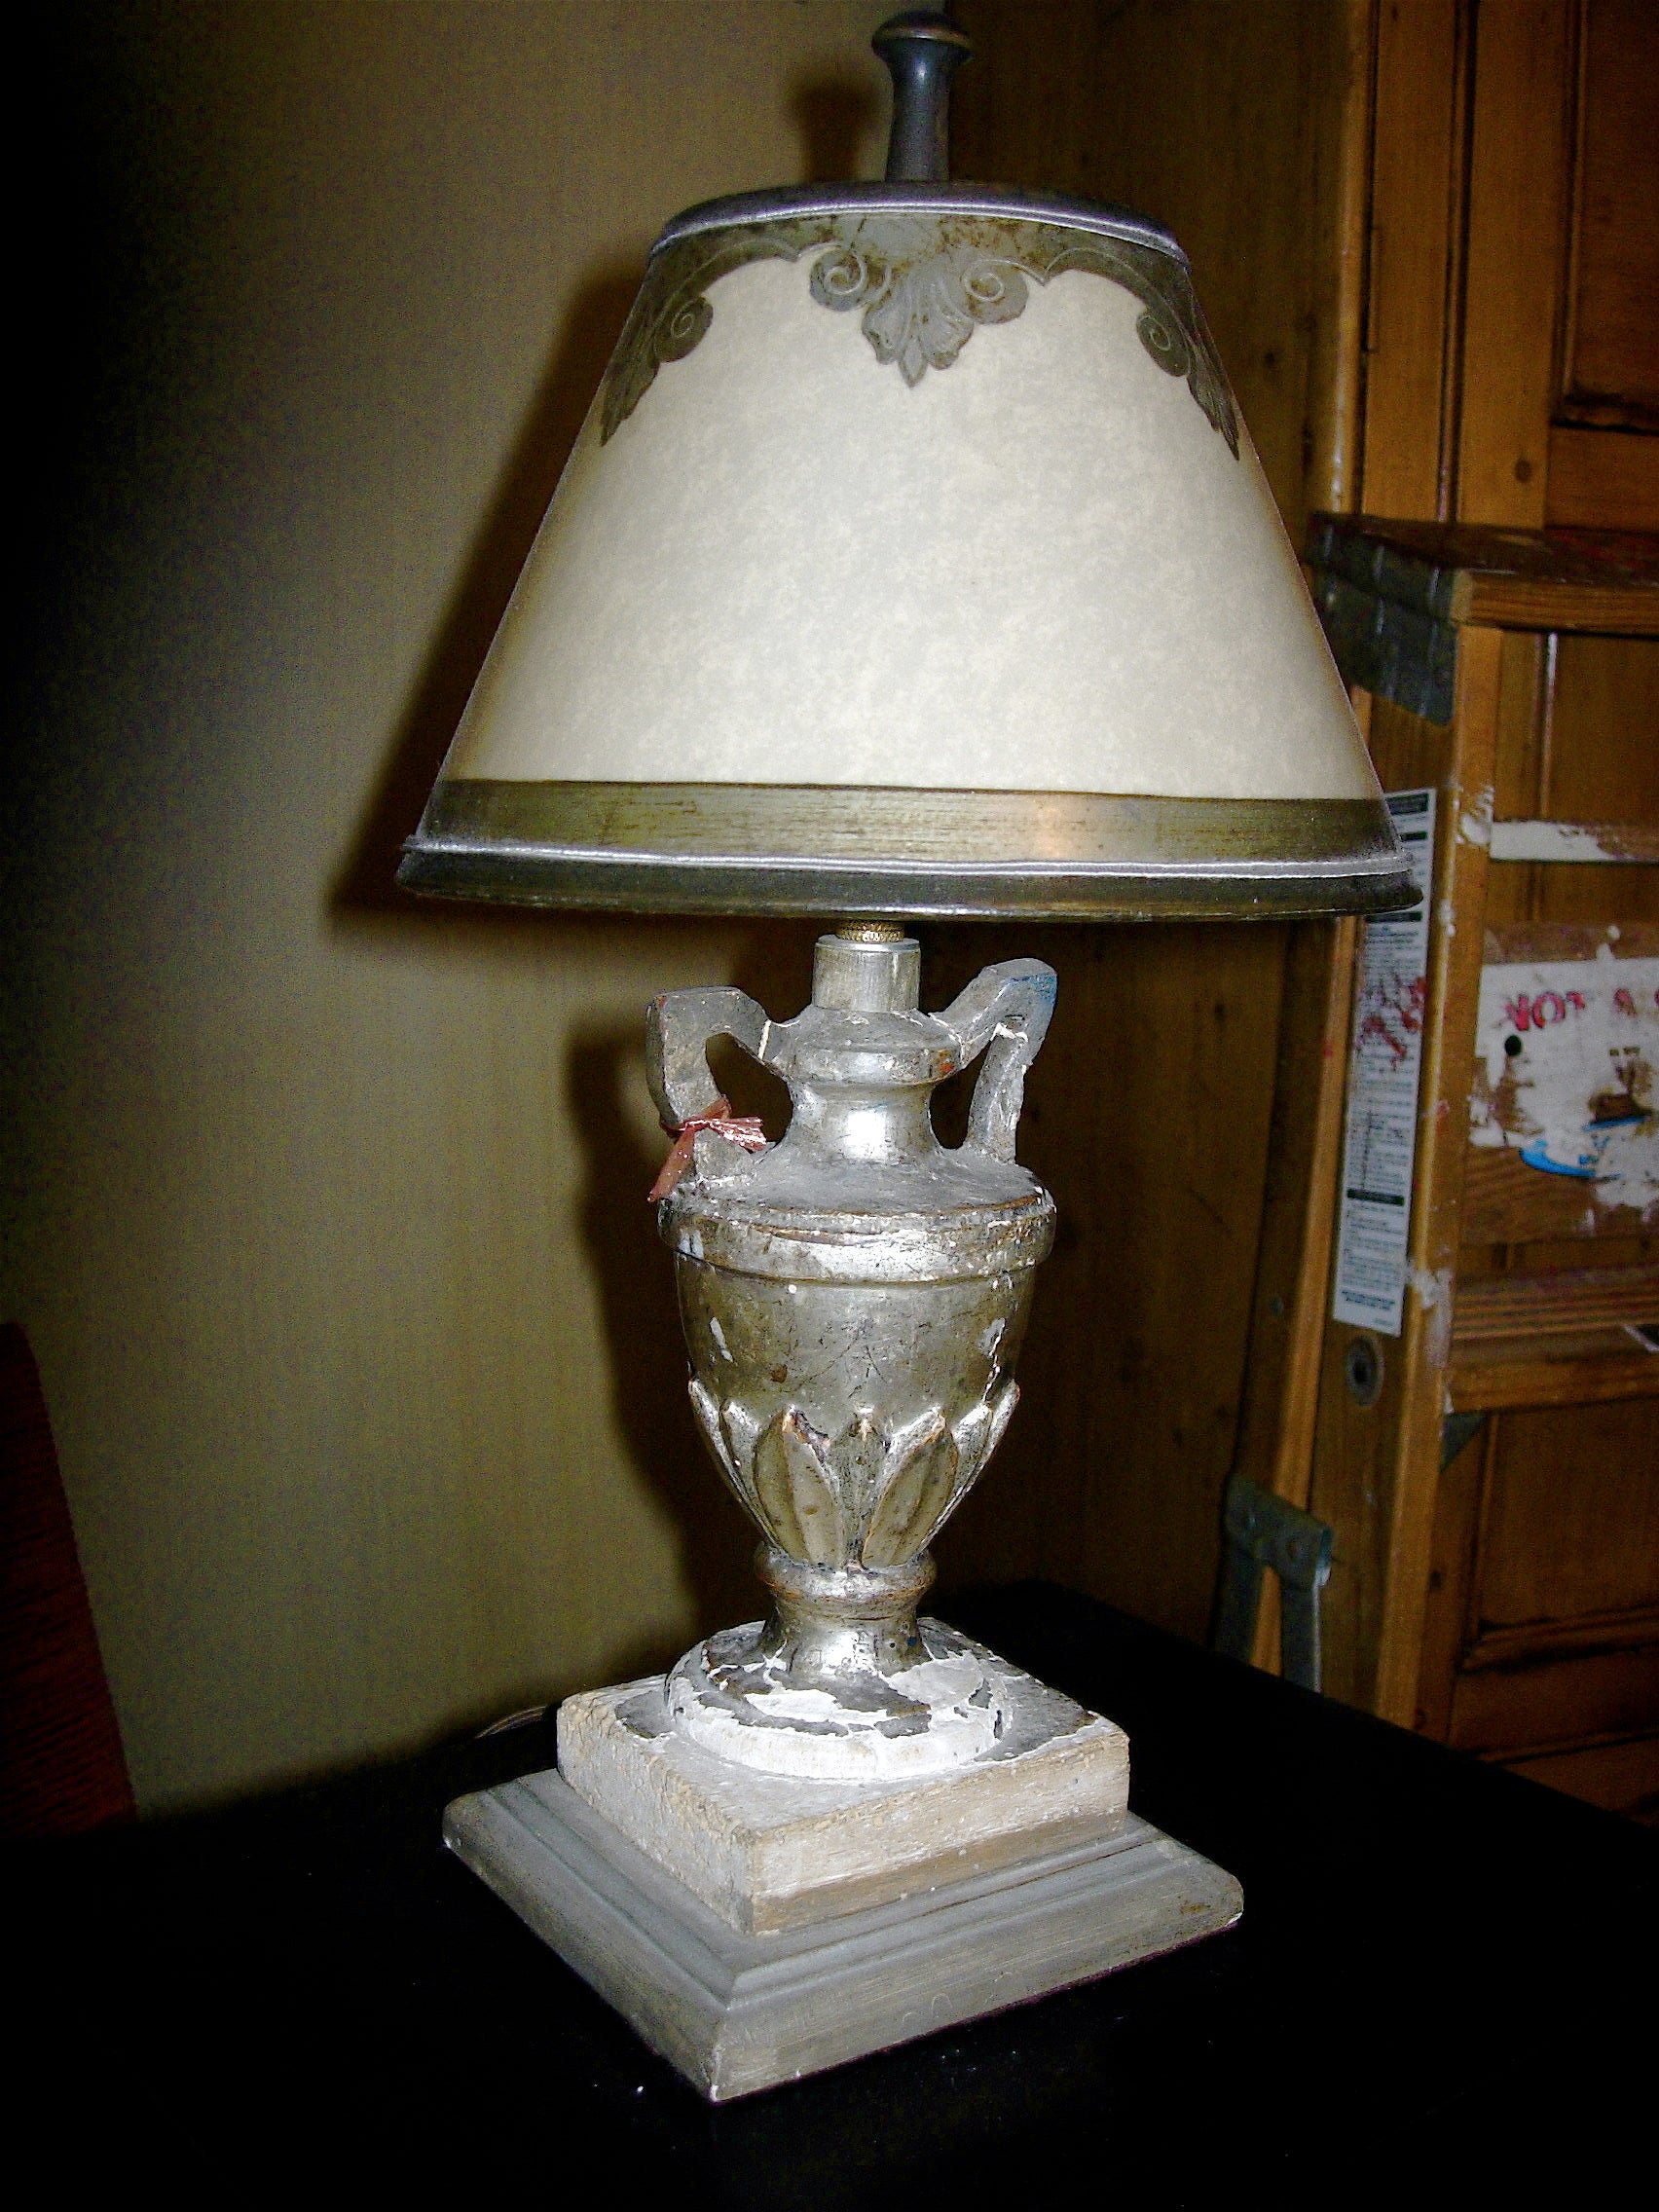 Pair of 19th Century Italian Urns Mounted as Lamps with Custom Shades